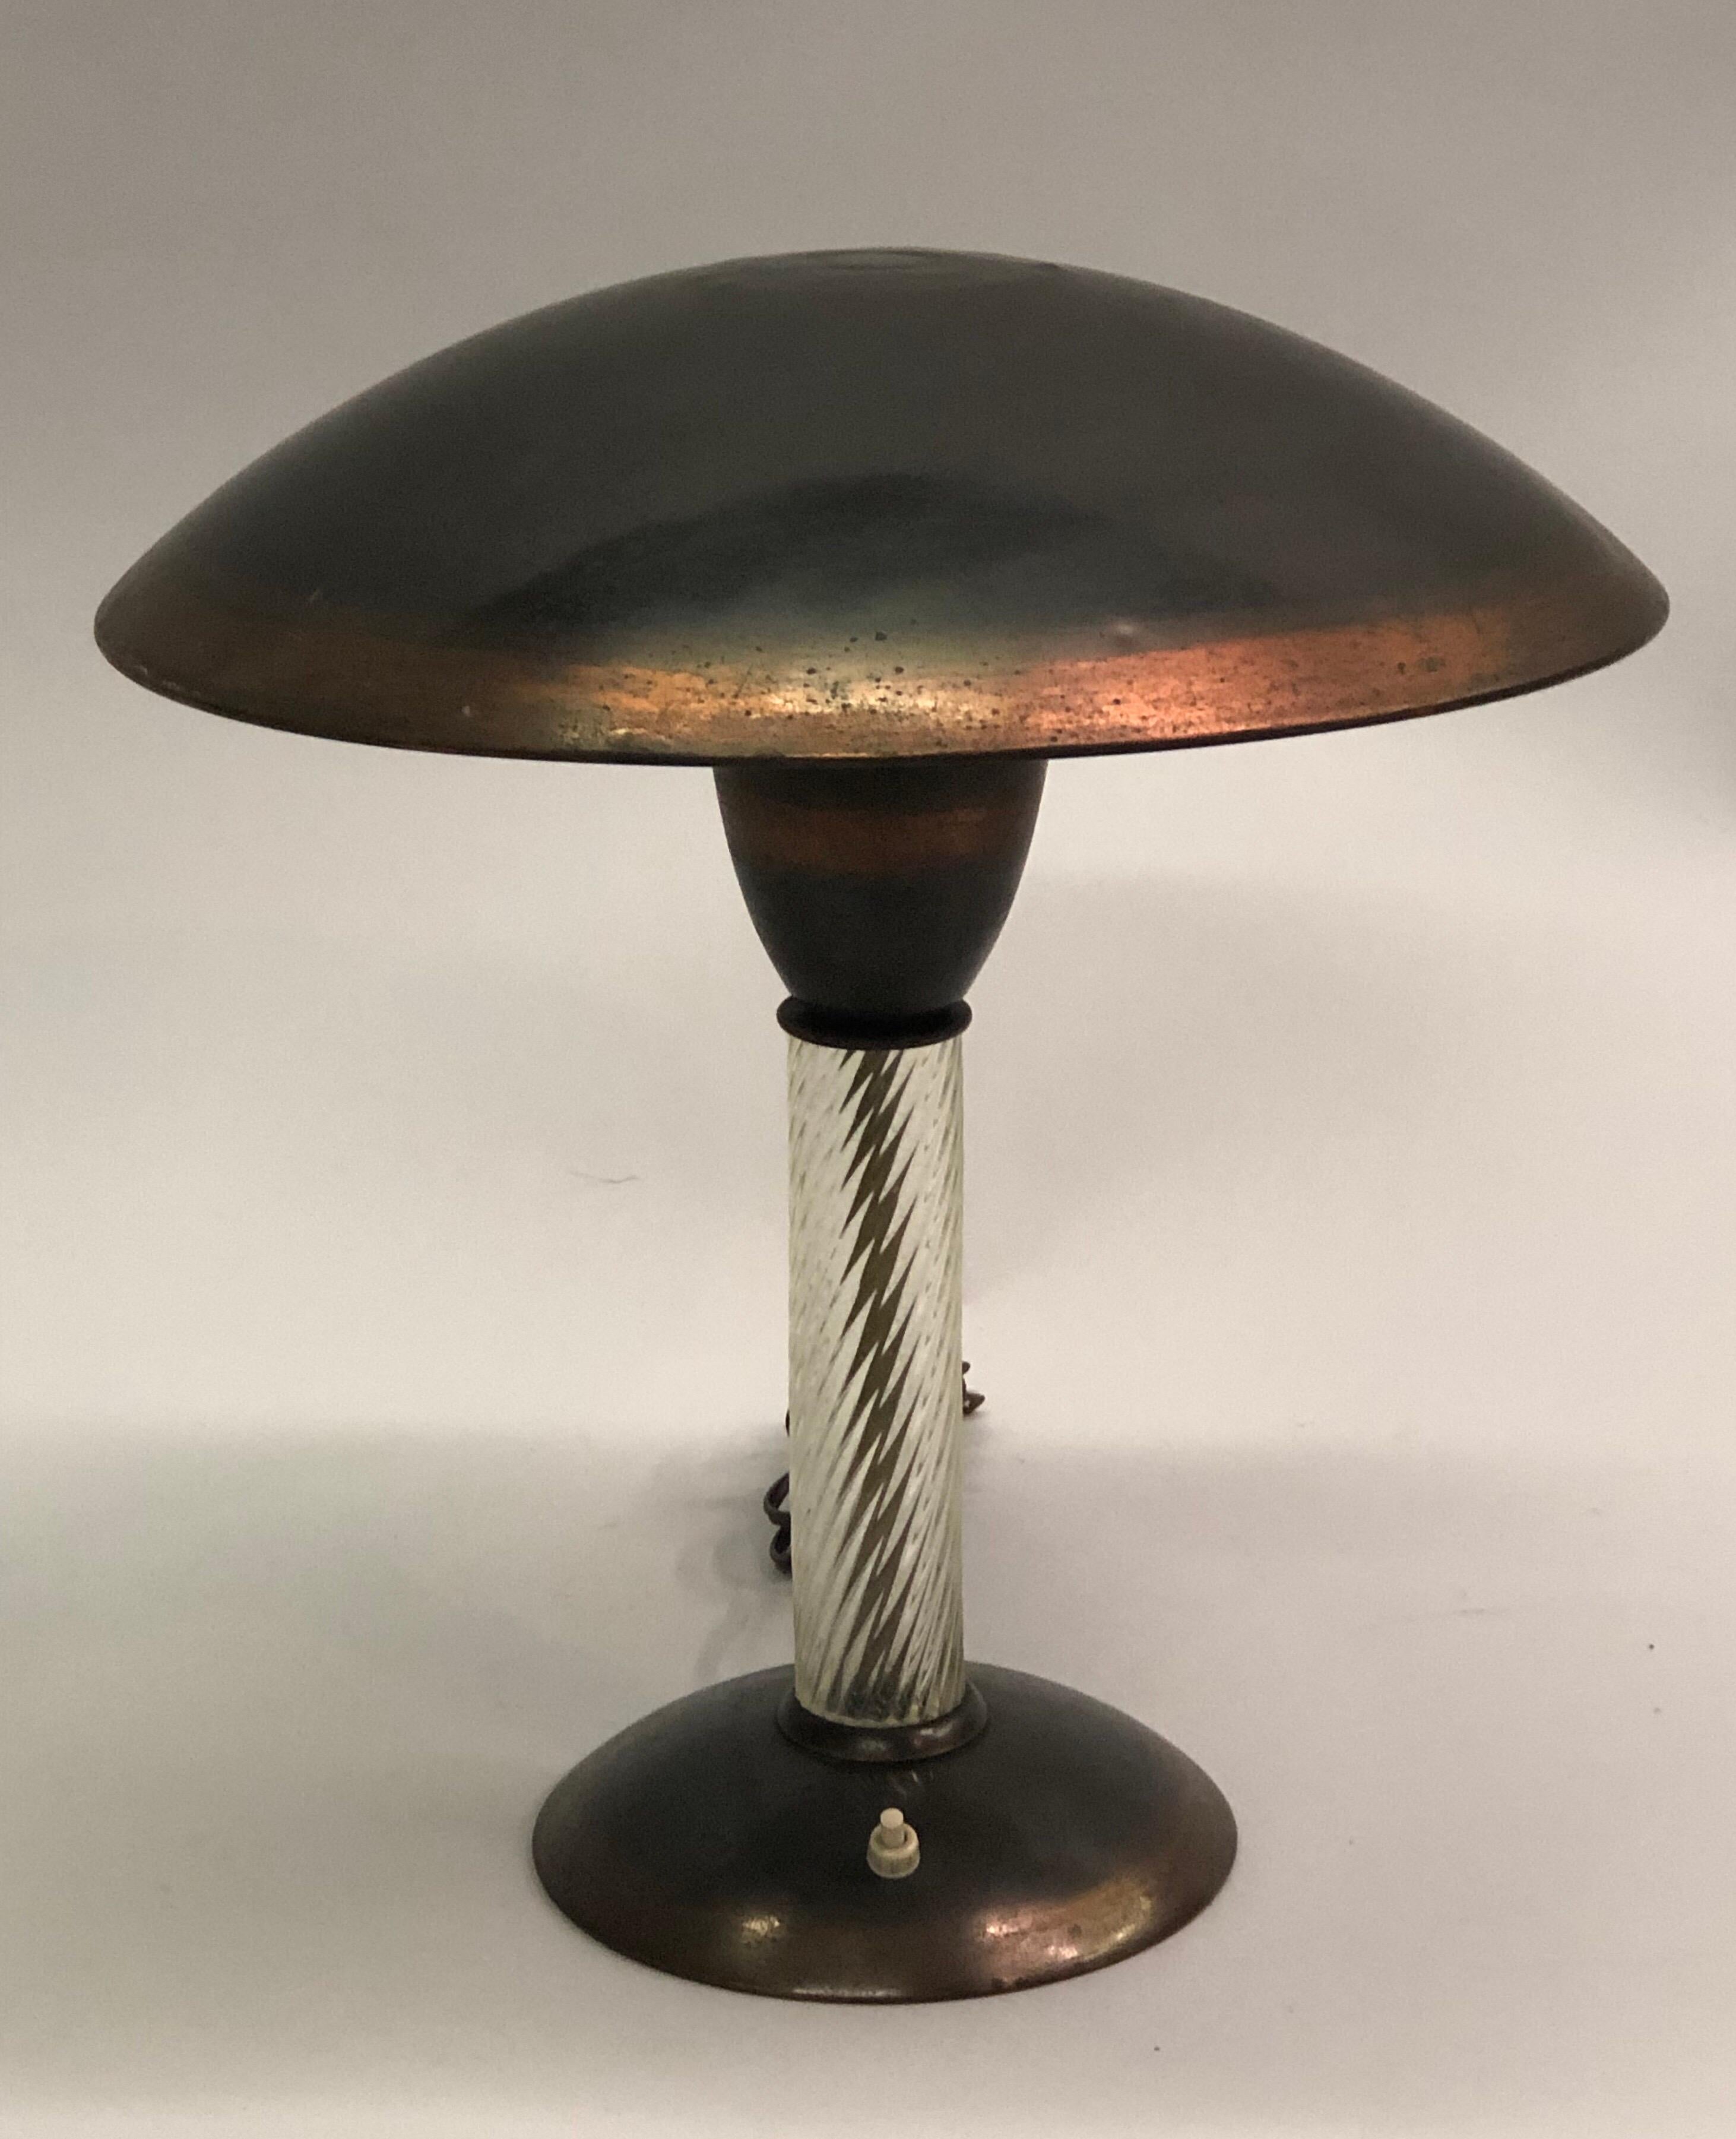 A Rare and Exquisite Italian Art Deco / Mid-Century Modern desk or table lamp featuring the craftsmanship of the design leaders of the 20th Century and uniting timeless materials: metal and hand blown glass. The piece is composed in metal and copper